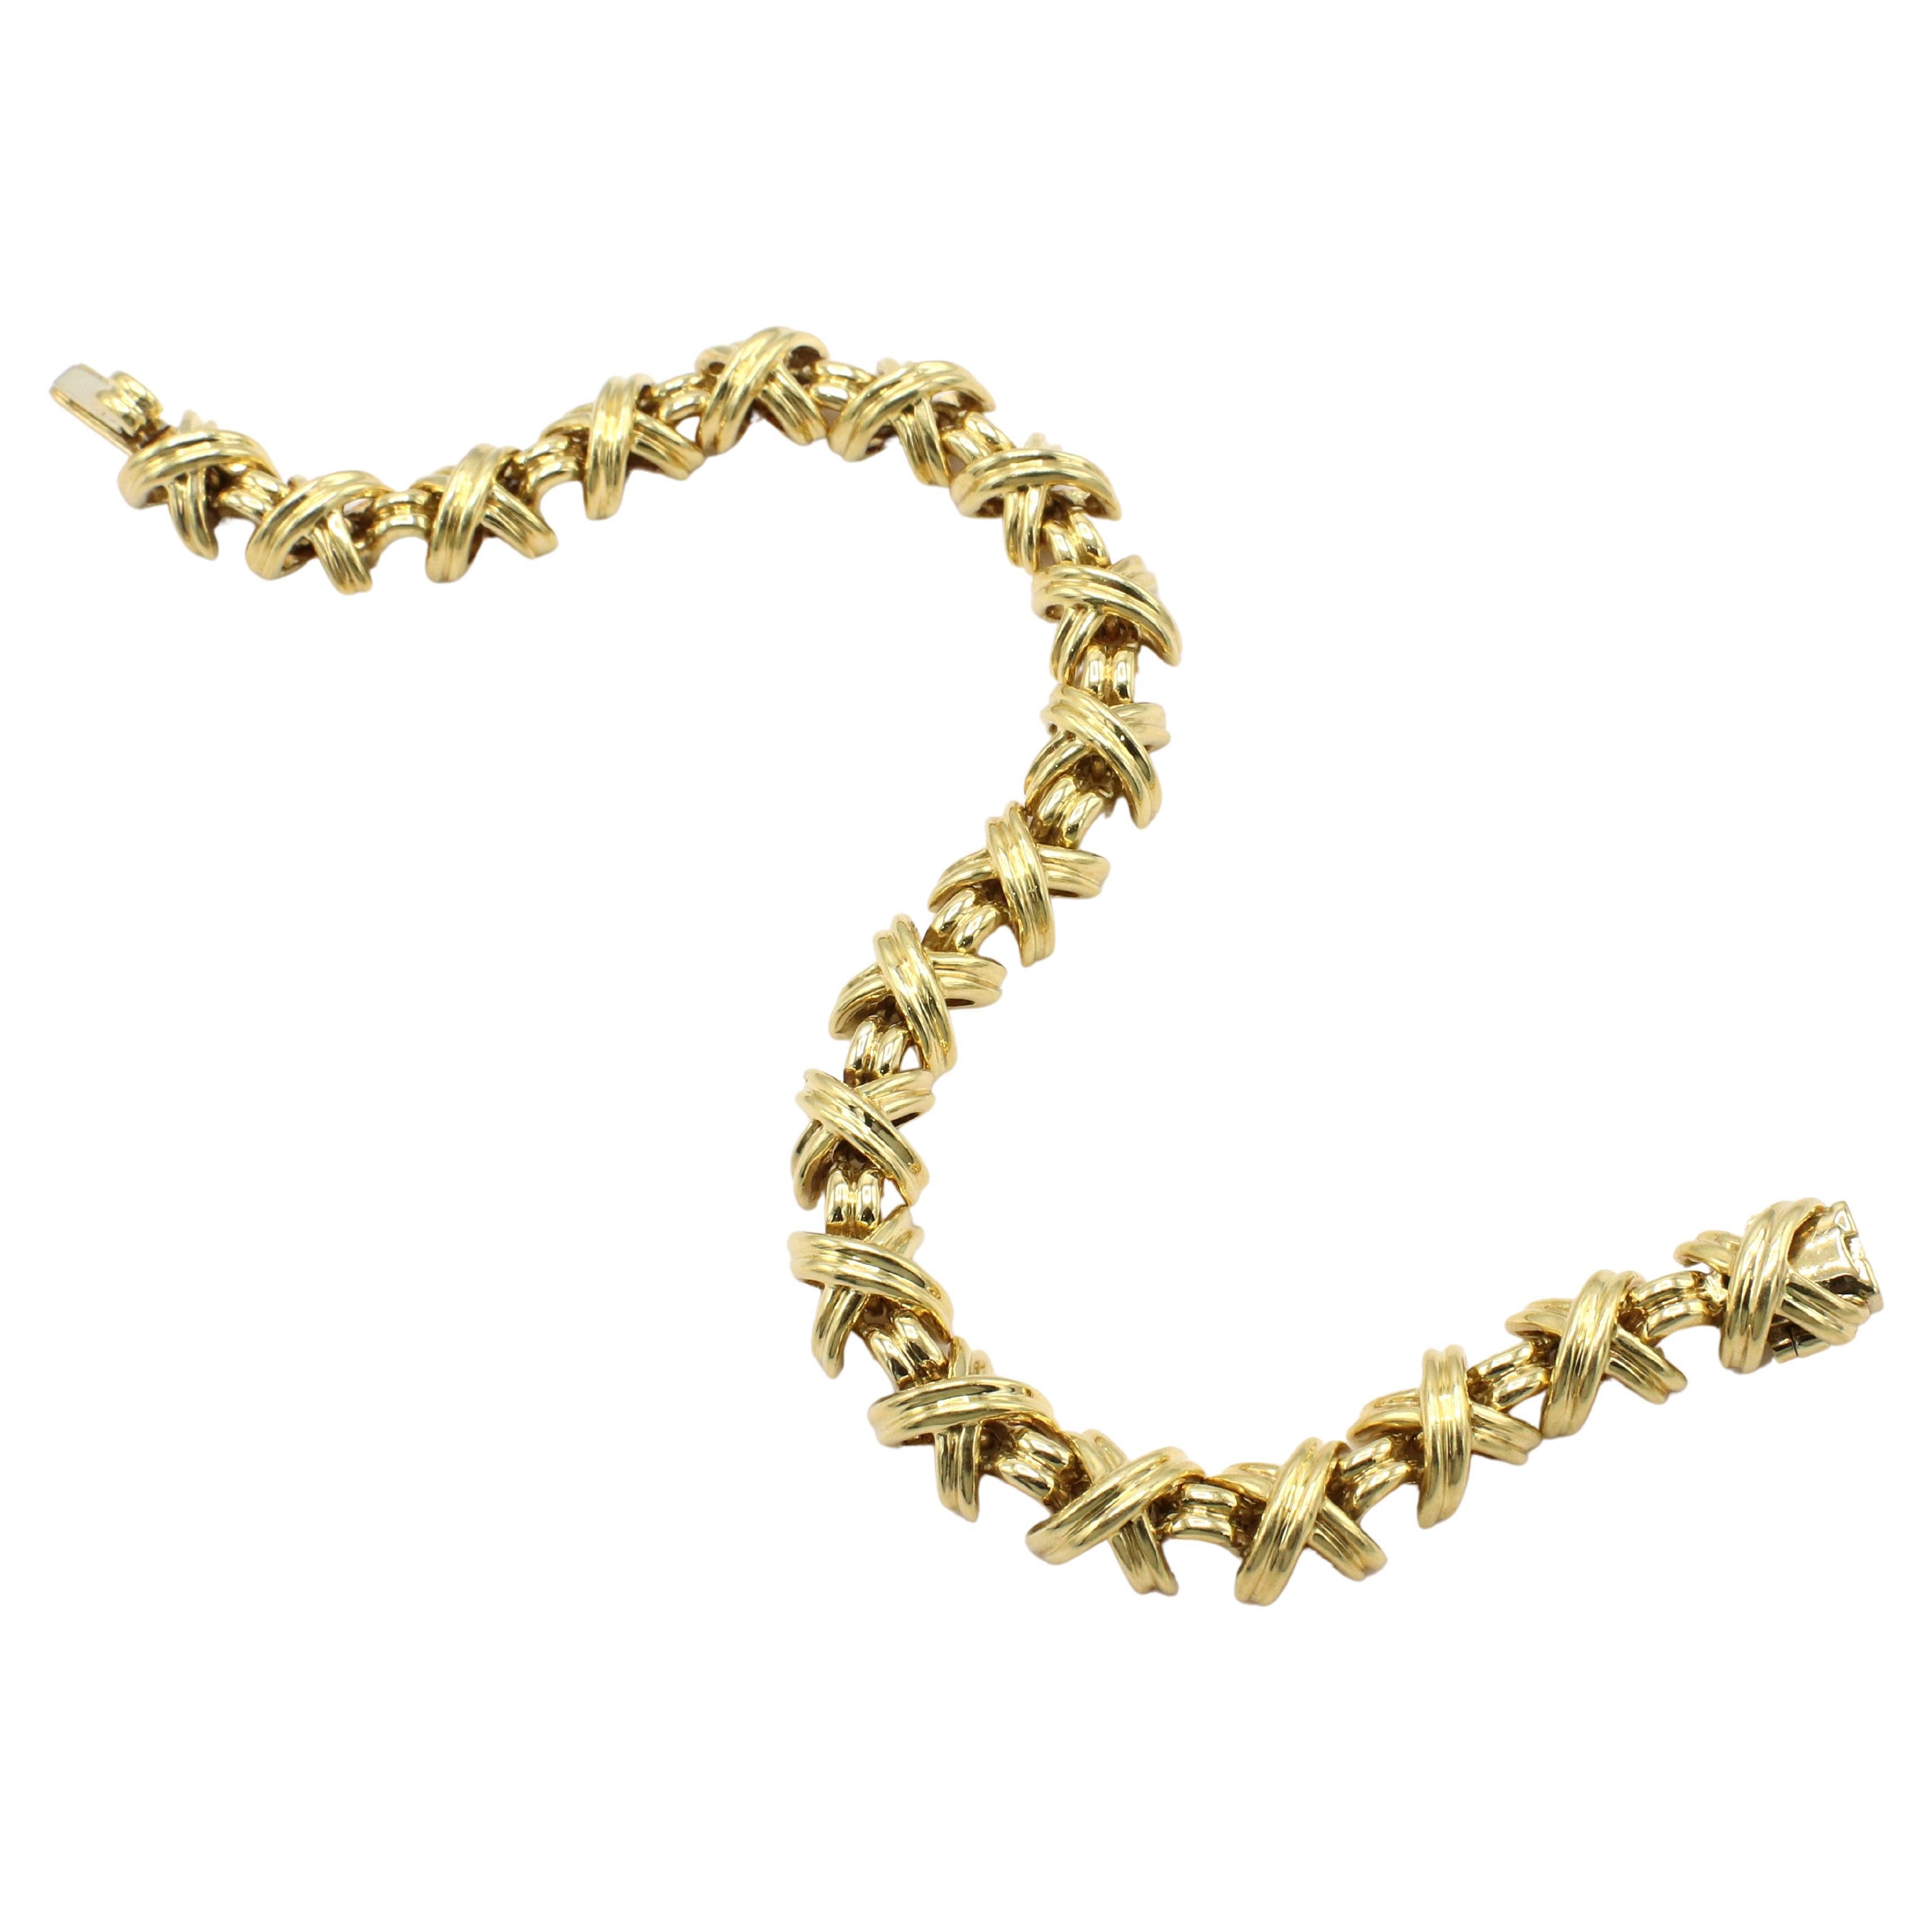 Tiffany & Co. Signature X 18 Karat Yellow Gold Link Bracelet 
Metal: 18k yellow gold
Weight: 30.38 grams
Length: 7 inches
Width: 6.5mm
Signed: © T&Co. 750
